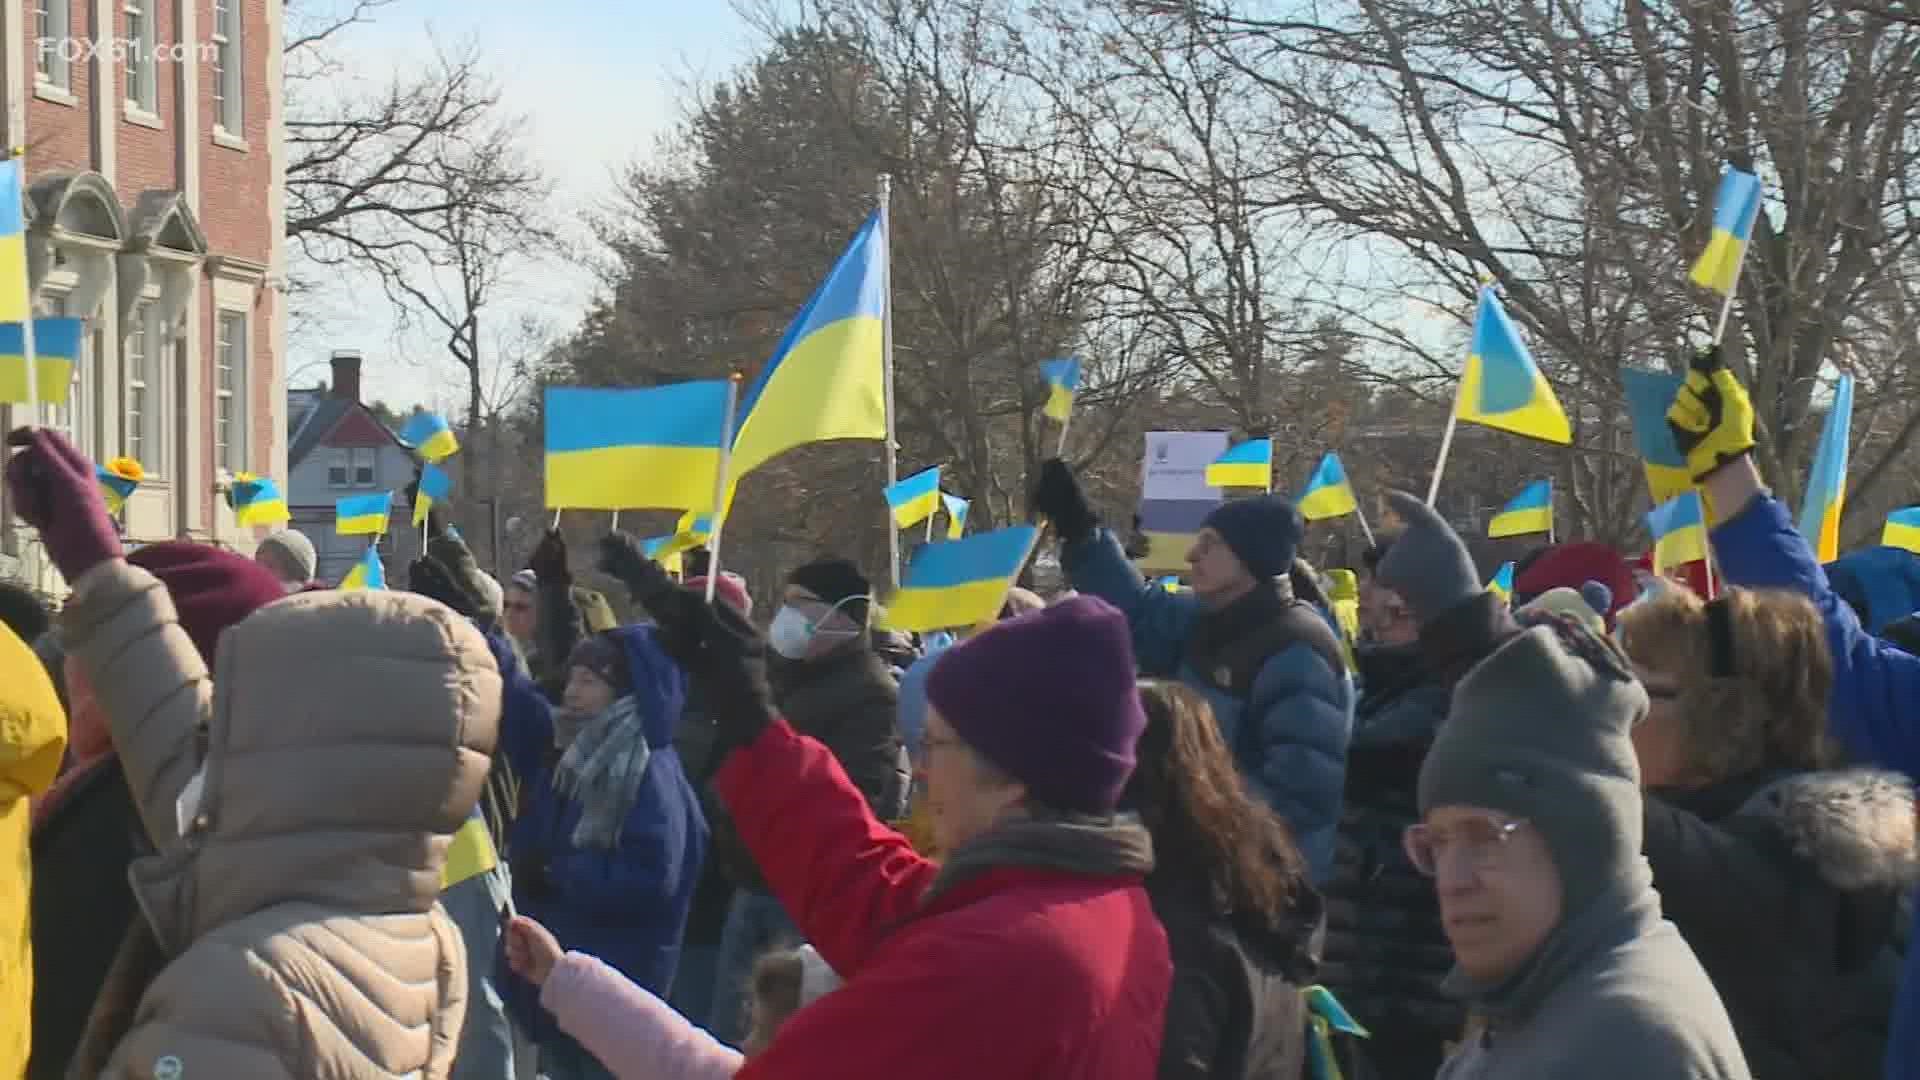 Polish-American organizations hosted a charity concert in New Britain to help Ukrainian refugees.